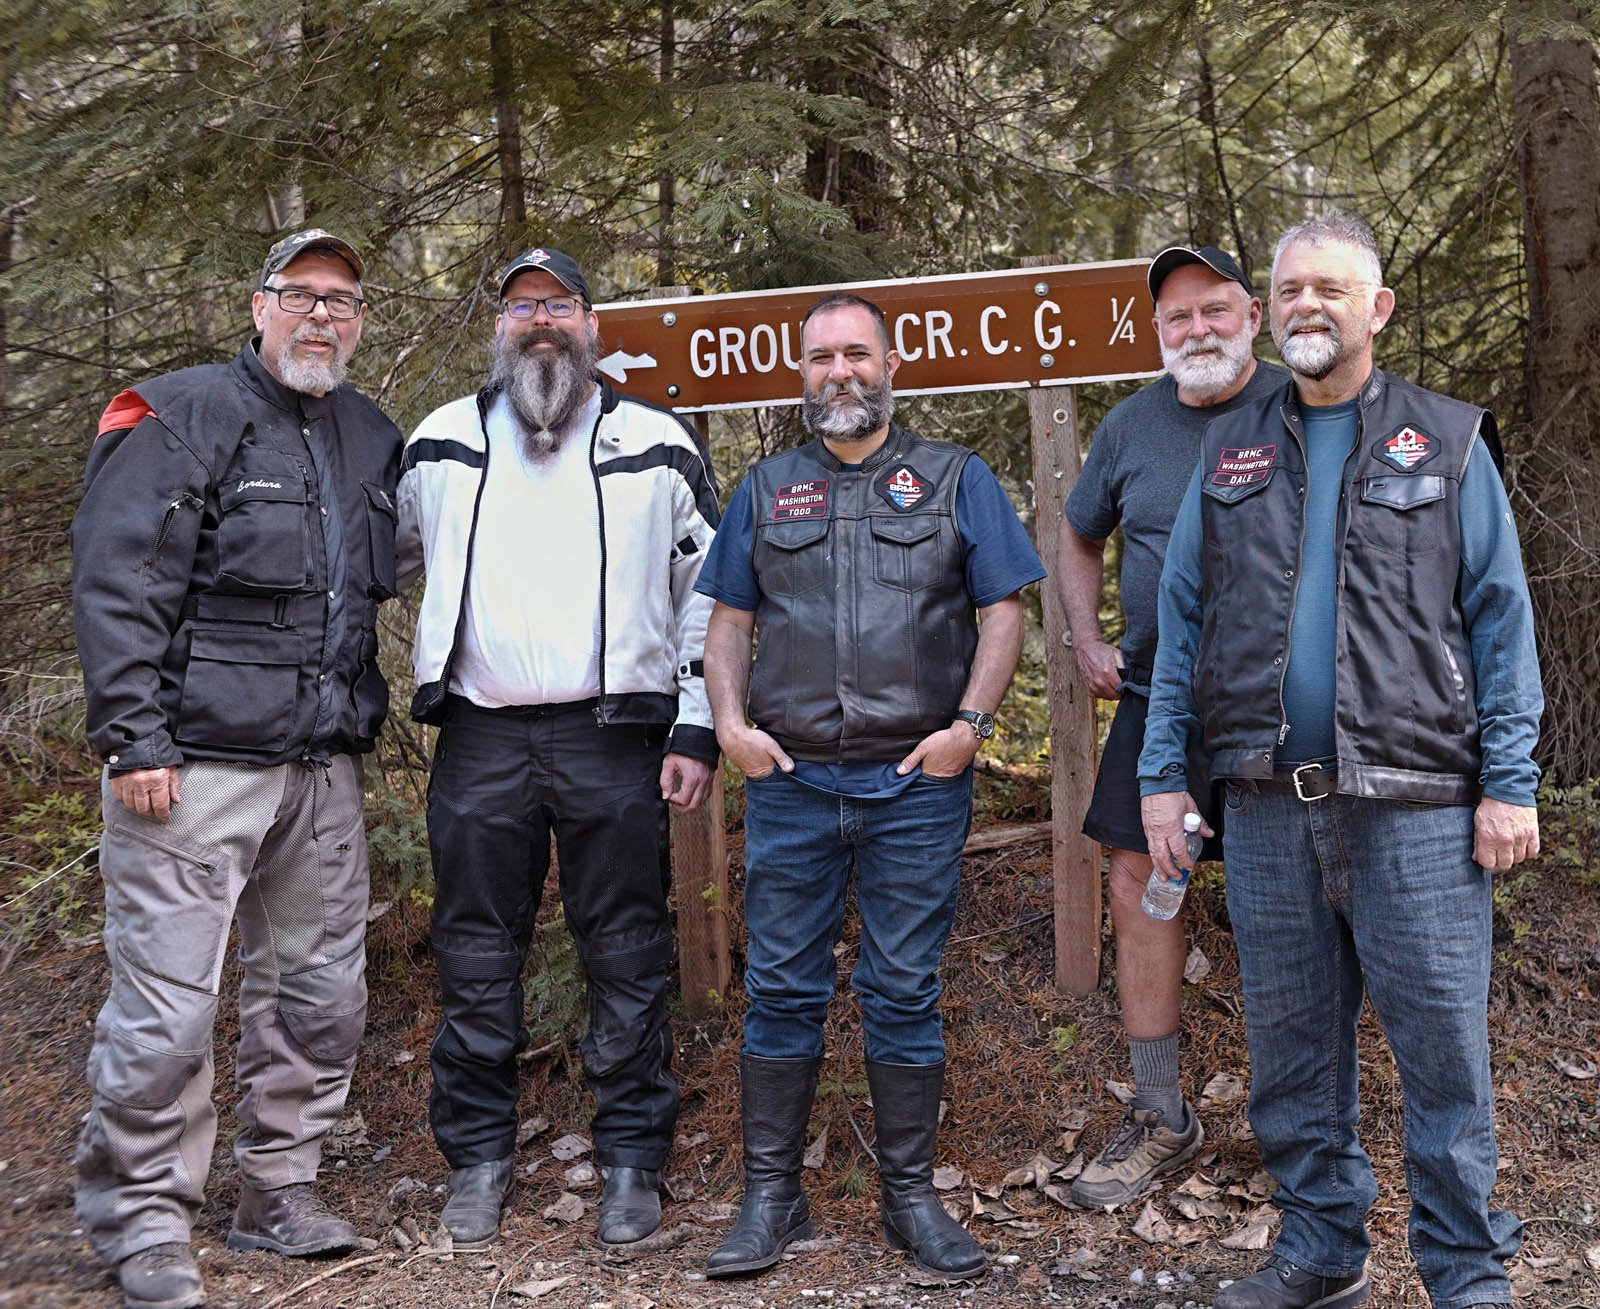 BRMC May2023 TomC ronS ToddM JeffB DaleC Sunday day ride to Grouse Creek.jpg